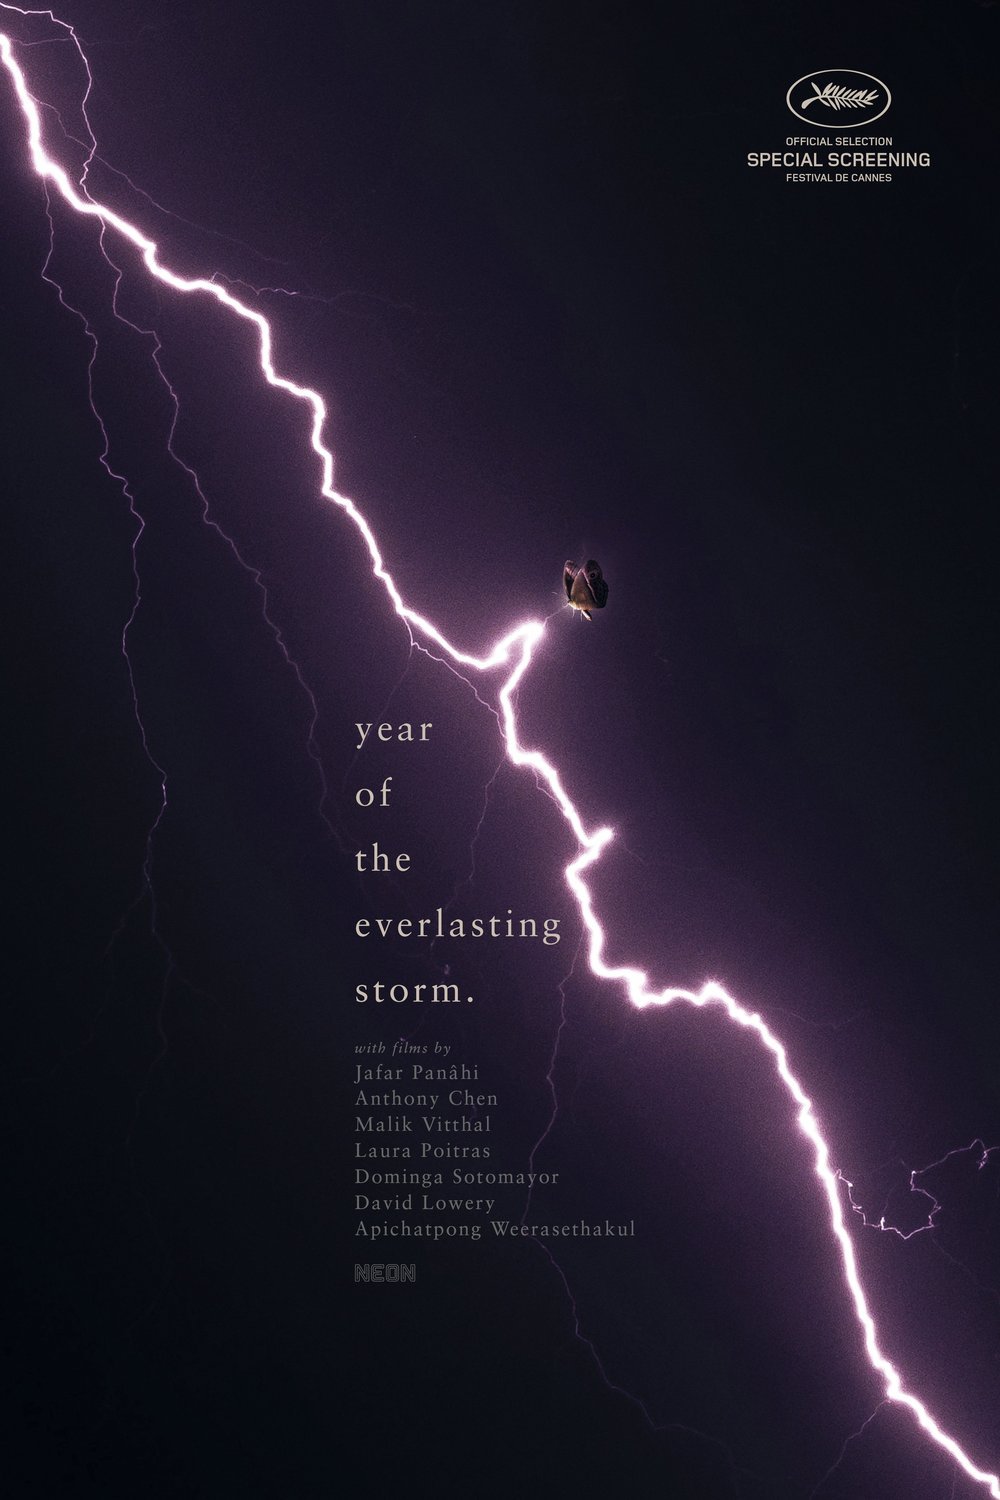 L'affiche du film The Year of the Everlasting Storm